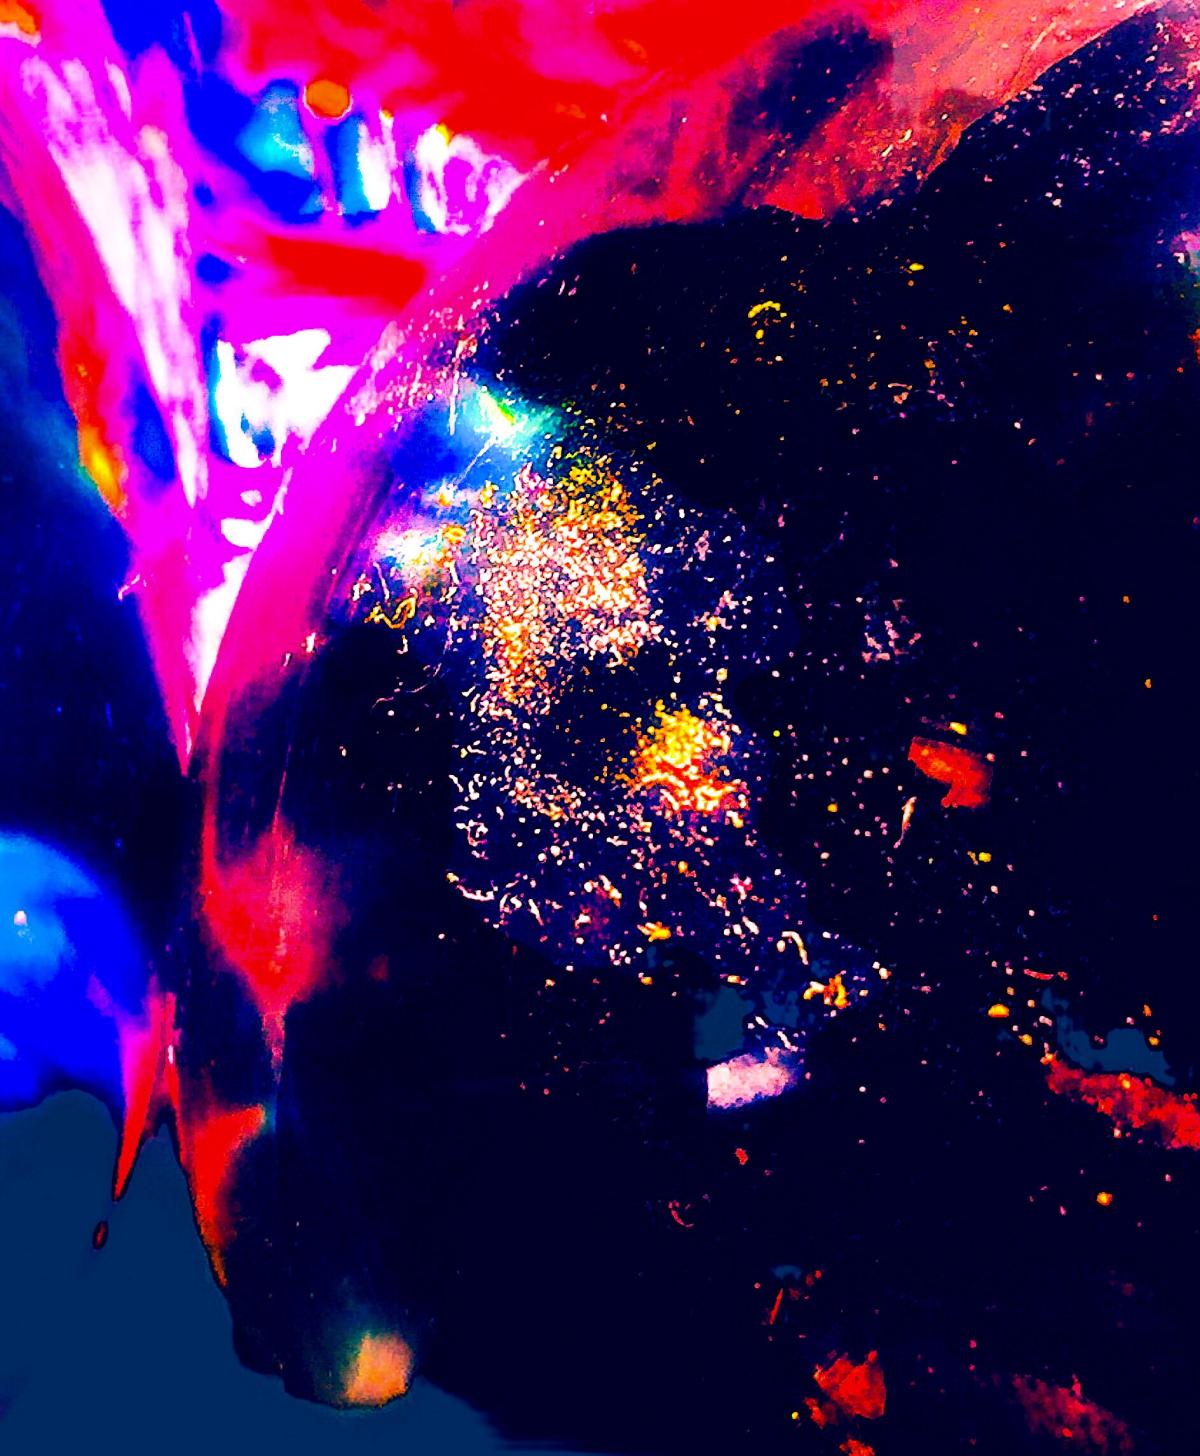 an abstract digital artwork with a dark background featuring bright prin, blues and fine points of yellow light in the centre